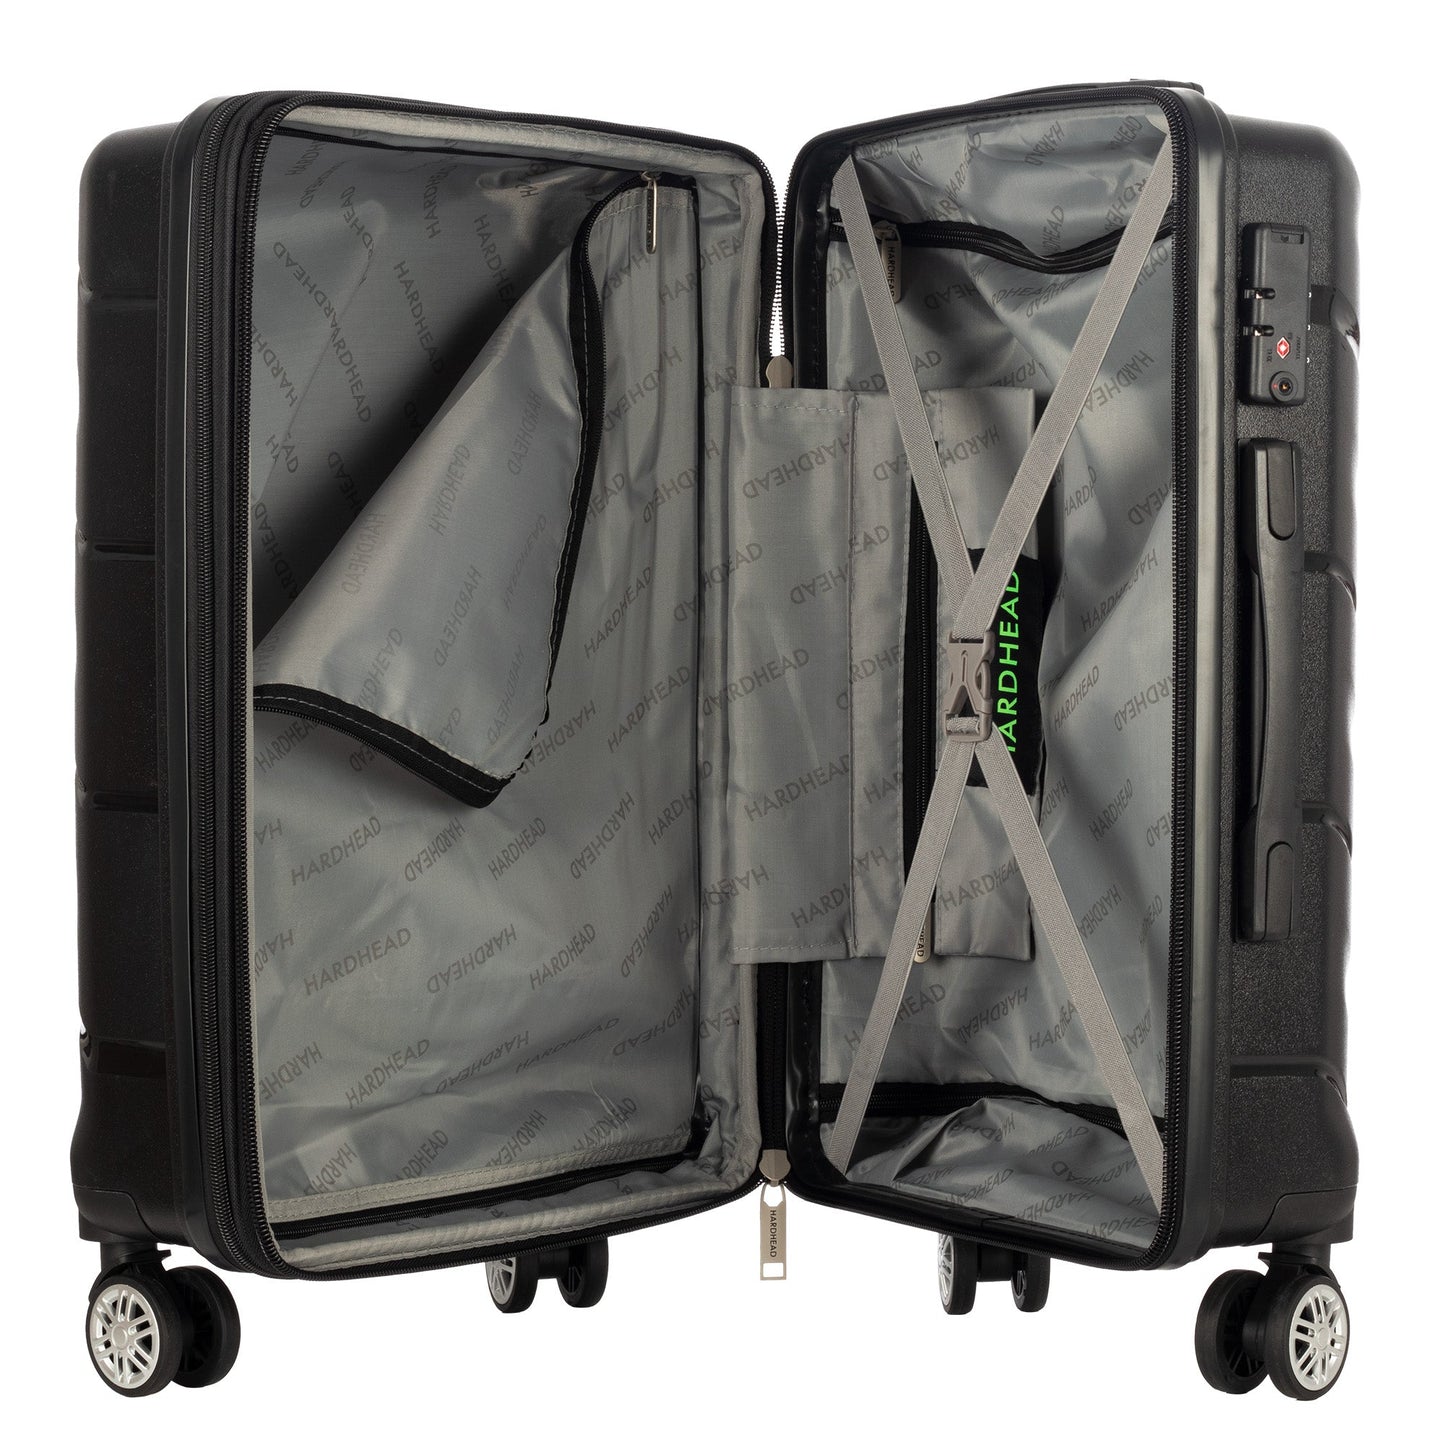 Ian collection luggage black (19") Suitcase Lock Spinner